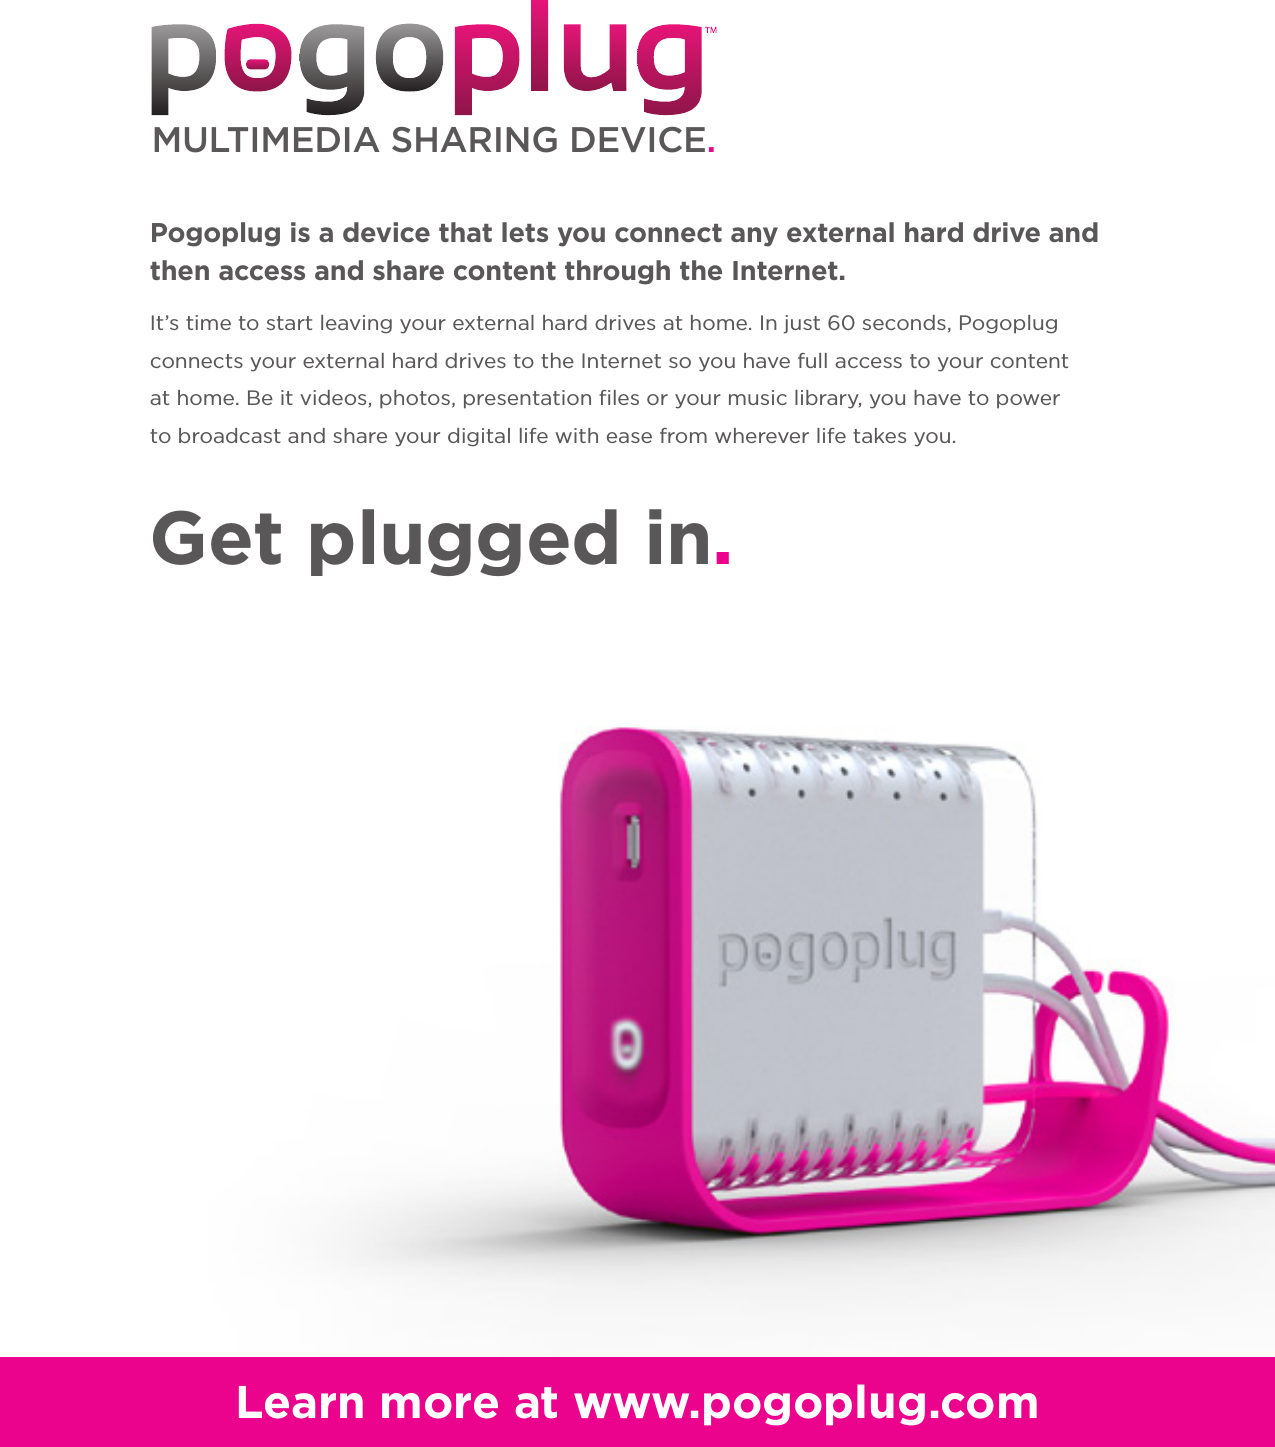 MULTIMEDIA SHARING DEVICE.Learn more at www.pogoplug.comGet plugged in.It’s time to start leaving your external hard drives at home. In just 60 seconds, Pogoplug connects your external hard drives to the Internet so you have full access to your contentat home. Be it videos, photos, presentation files or your music library, you have to power to broadcast and share your digital life with ease from wherever life takes you. Pogoplug is a device that lets you connect any external hard drive and then access and share content through the Internet.